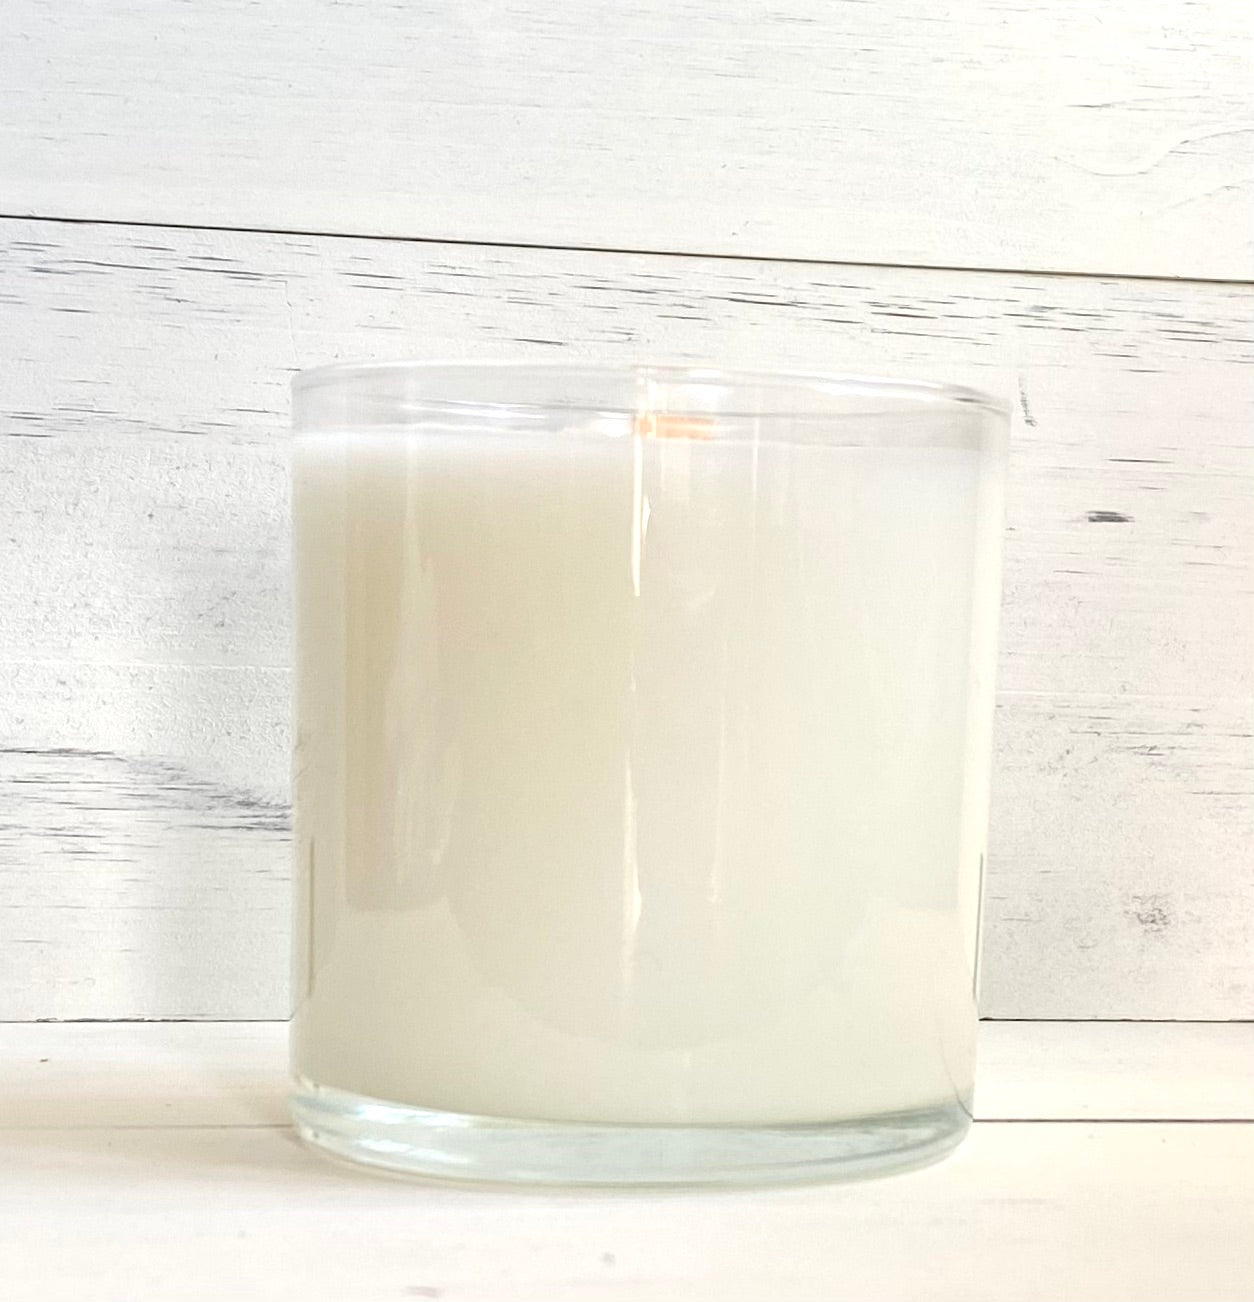 No Brand, Private Label Coconut Soy Candle 10oz